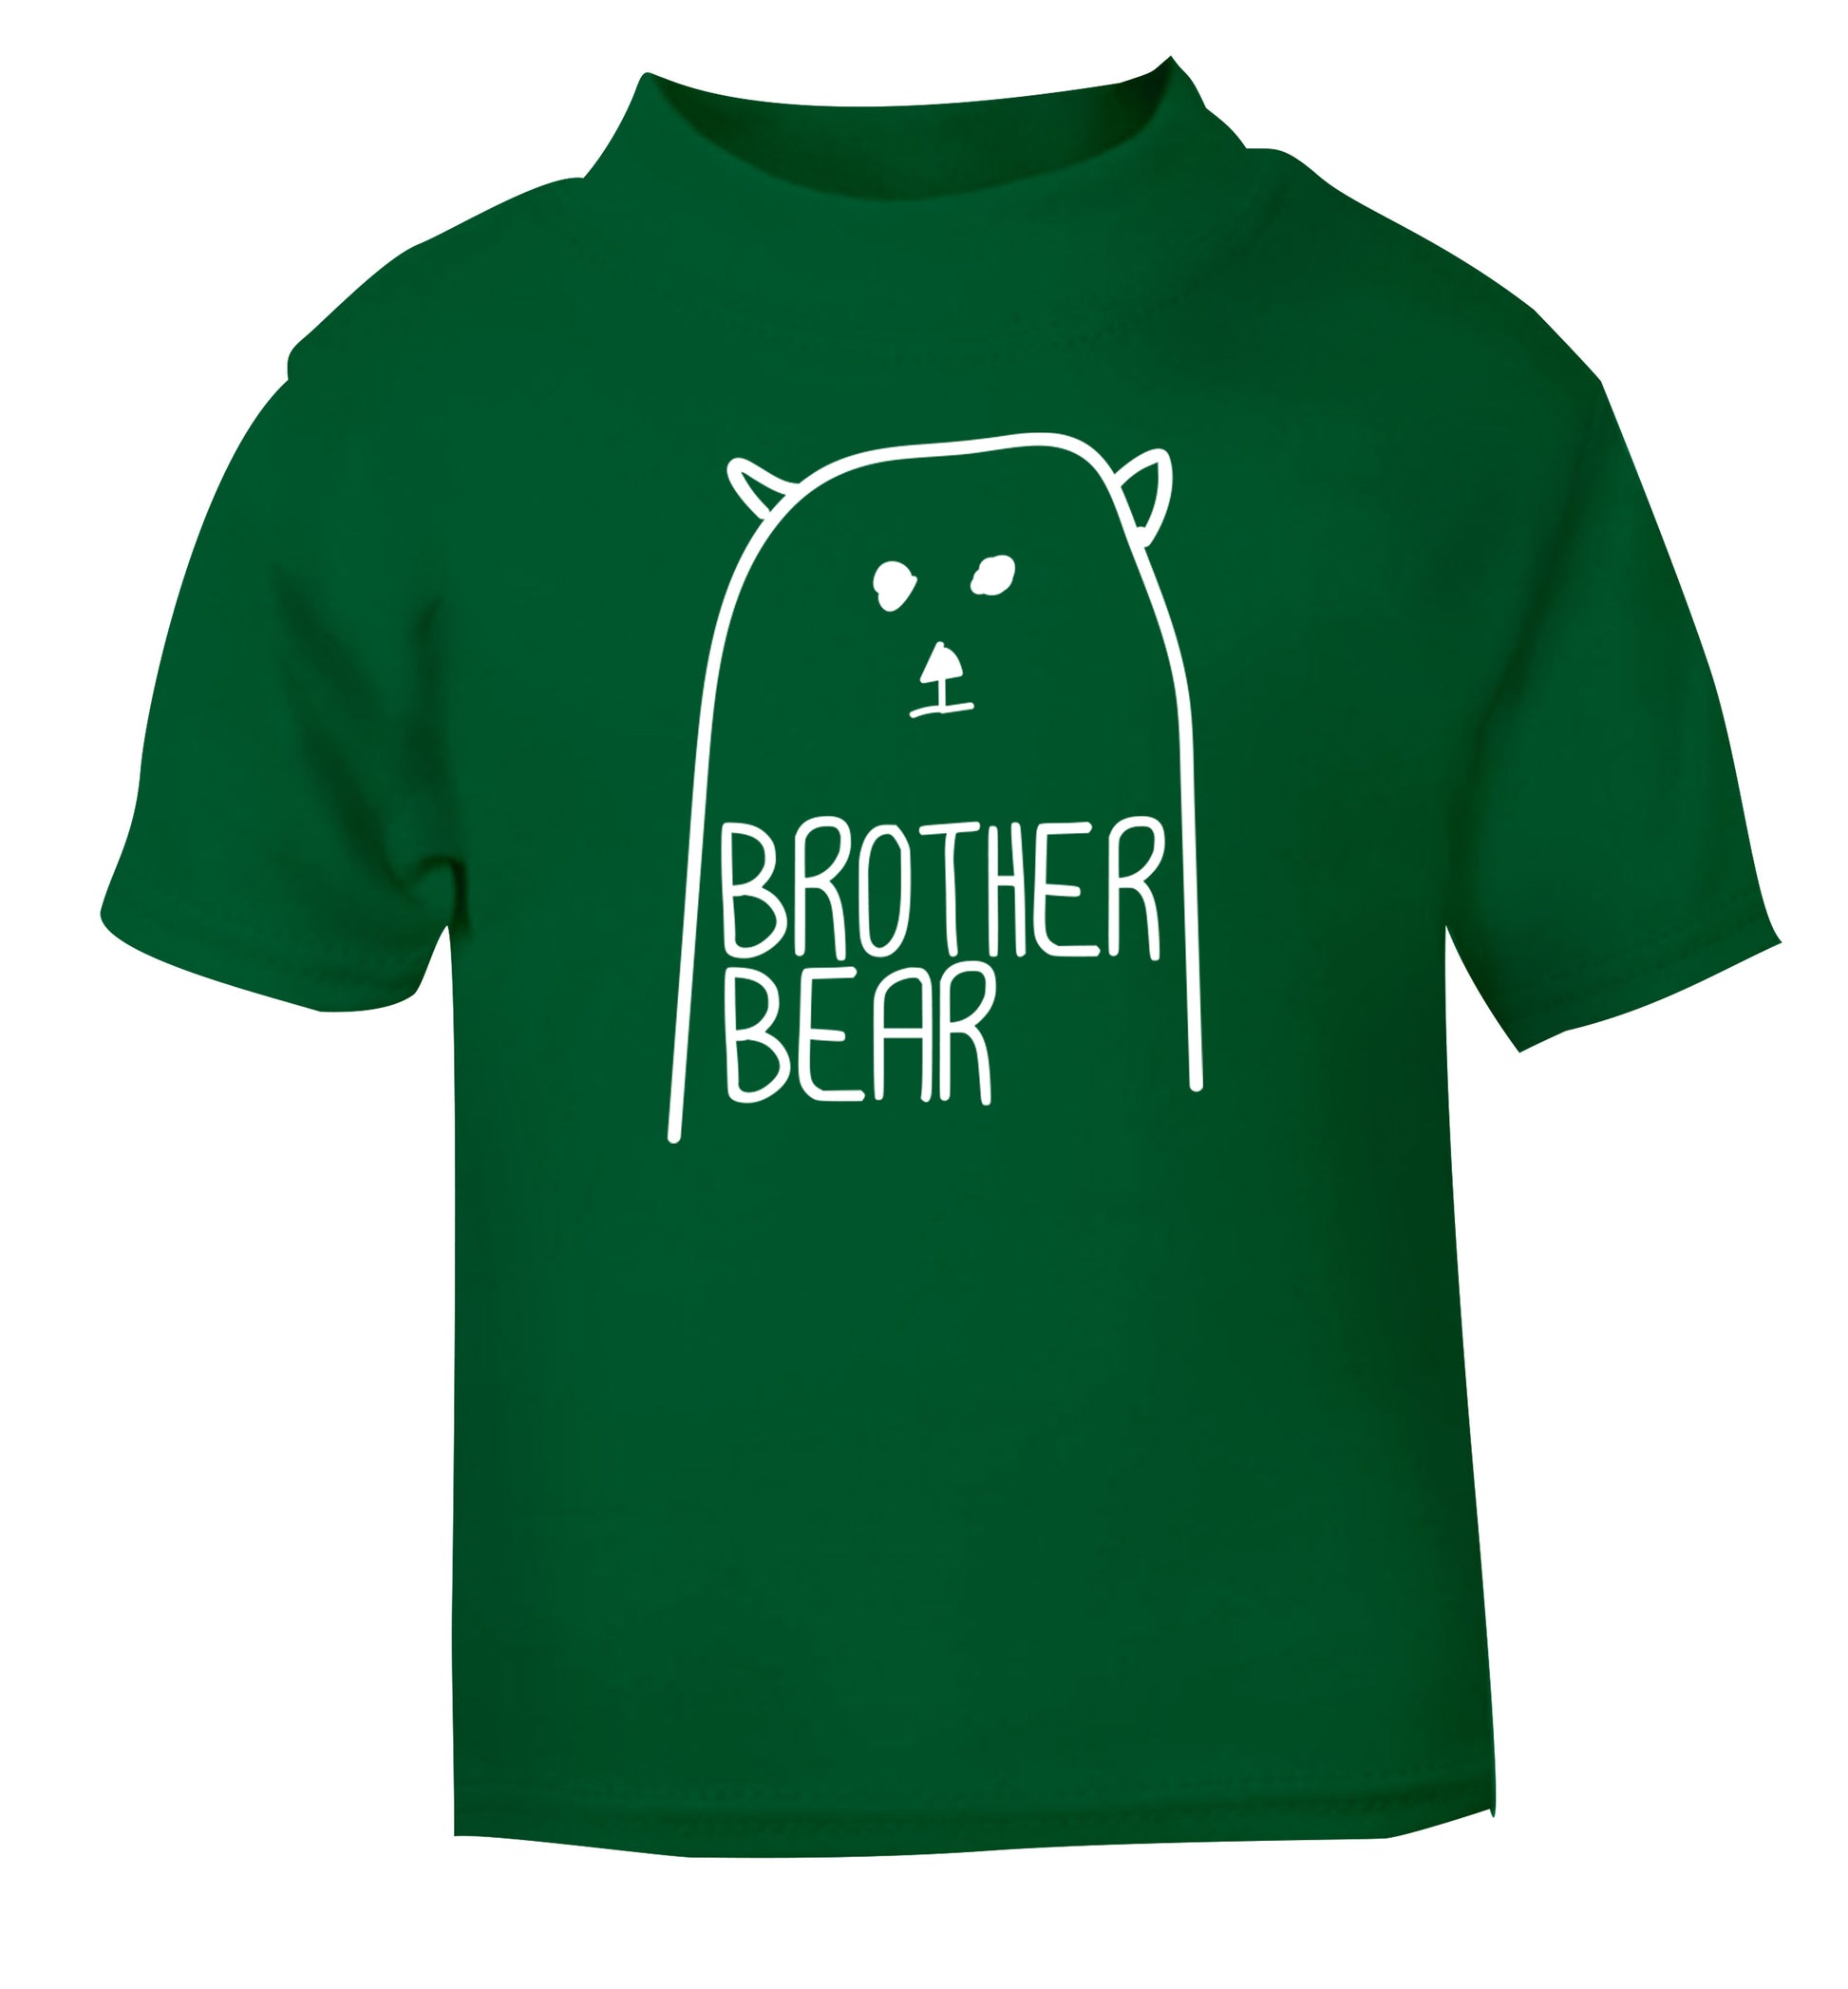 Brother bear green Baby Toddler Tshirt 2 Years